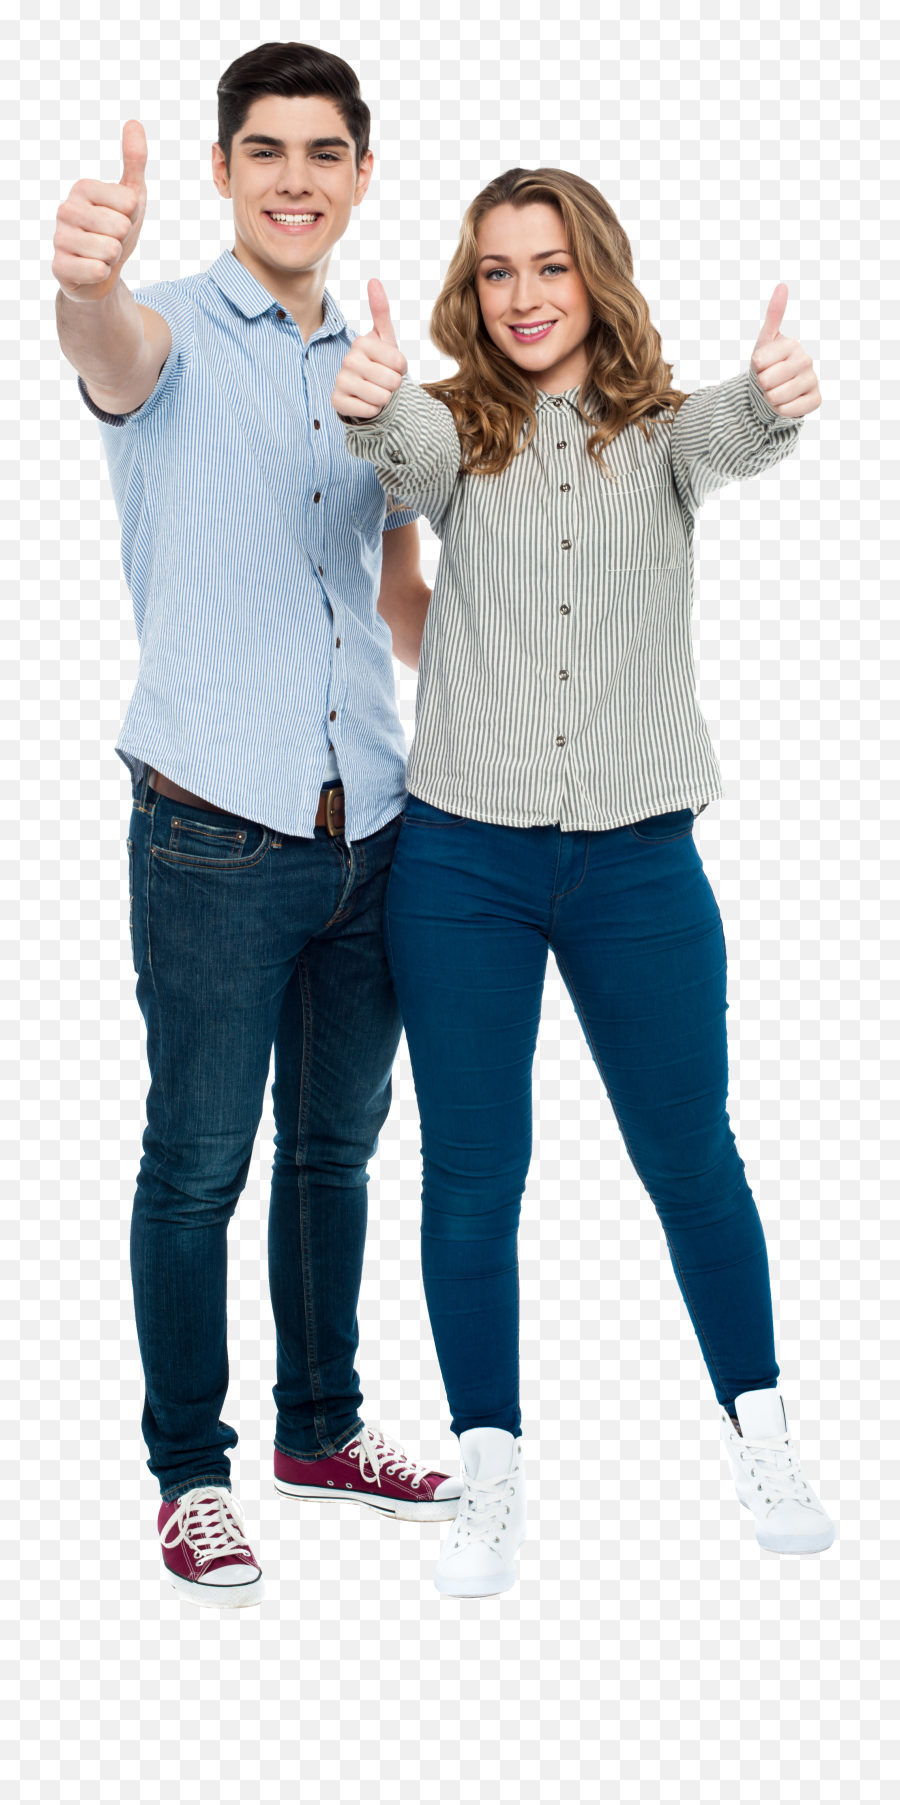 Couple Png Image - Couple Images Png Hd Emoji,Model Png